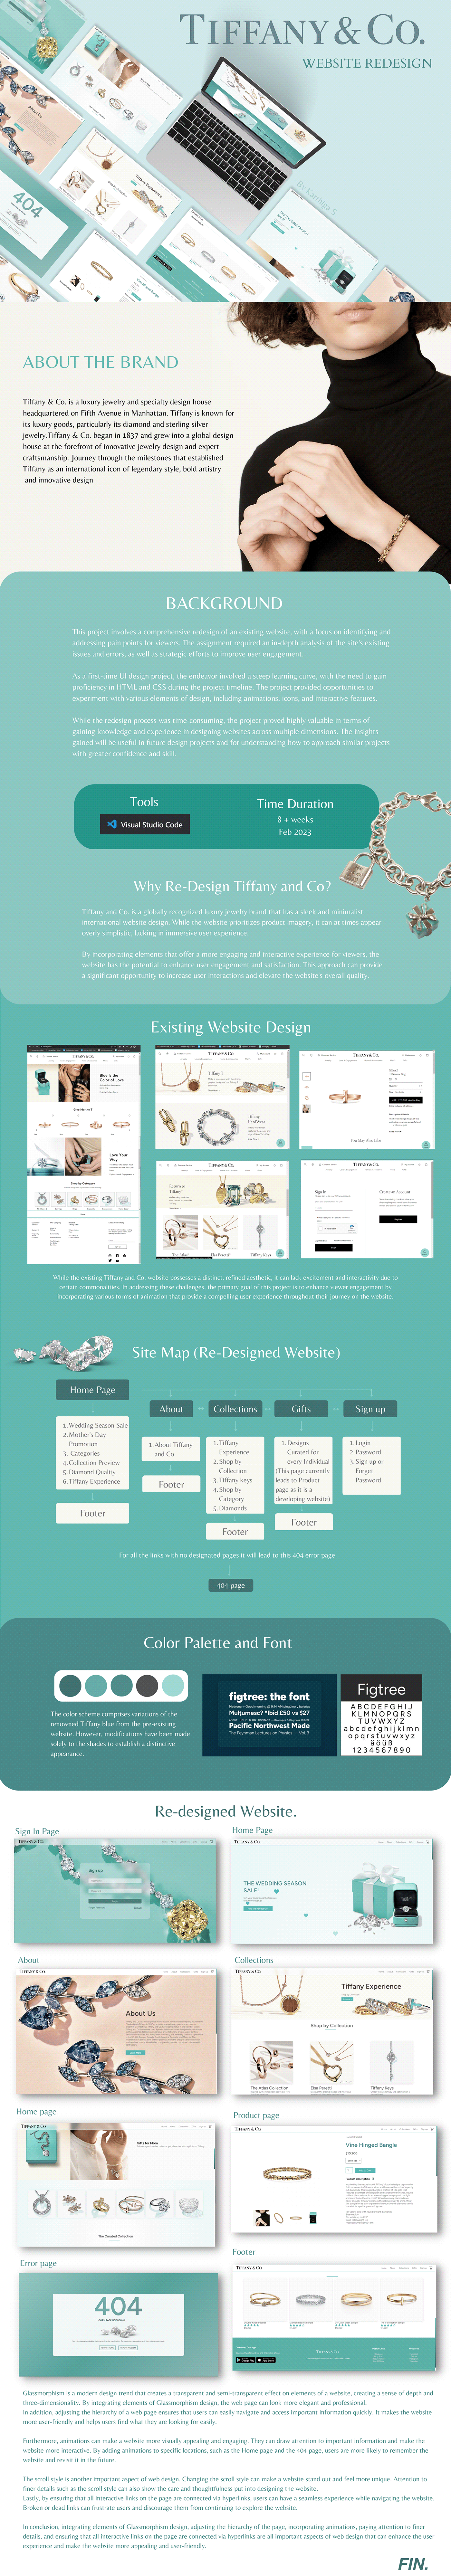 landing page NIFT redesign tiffany & co UI/UX user experience user interface Web Design  Website Design website redesign